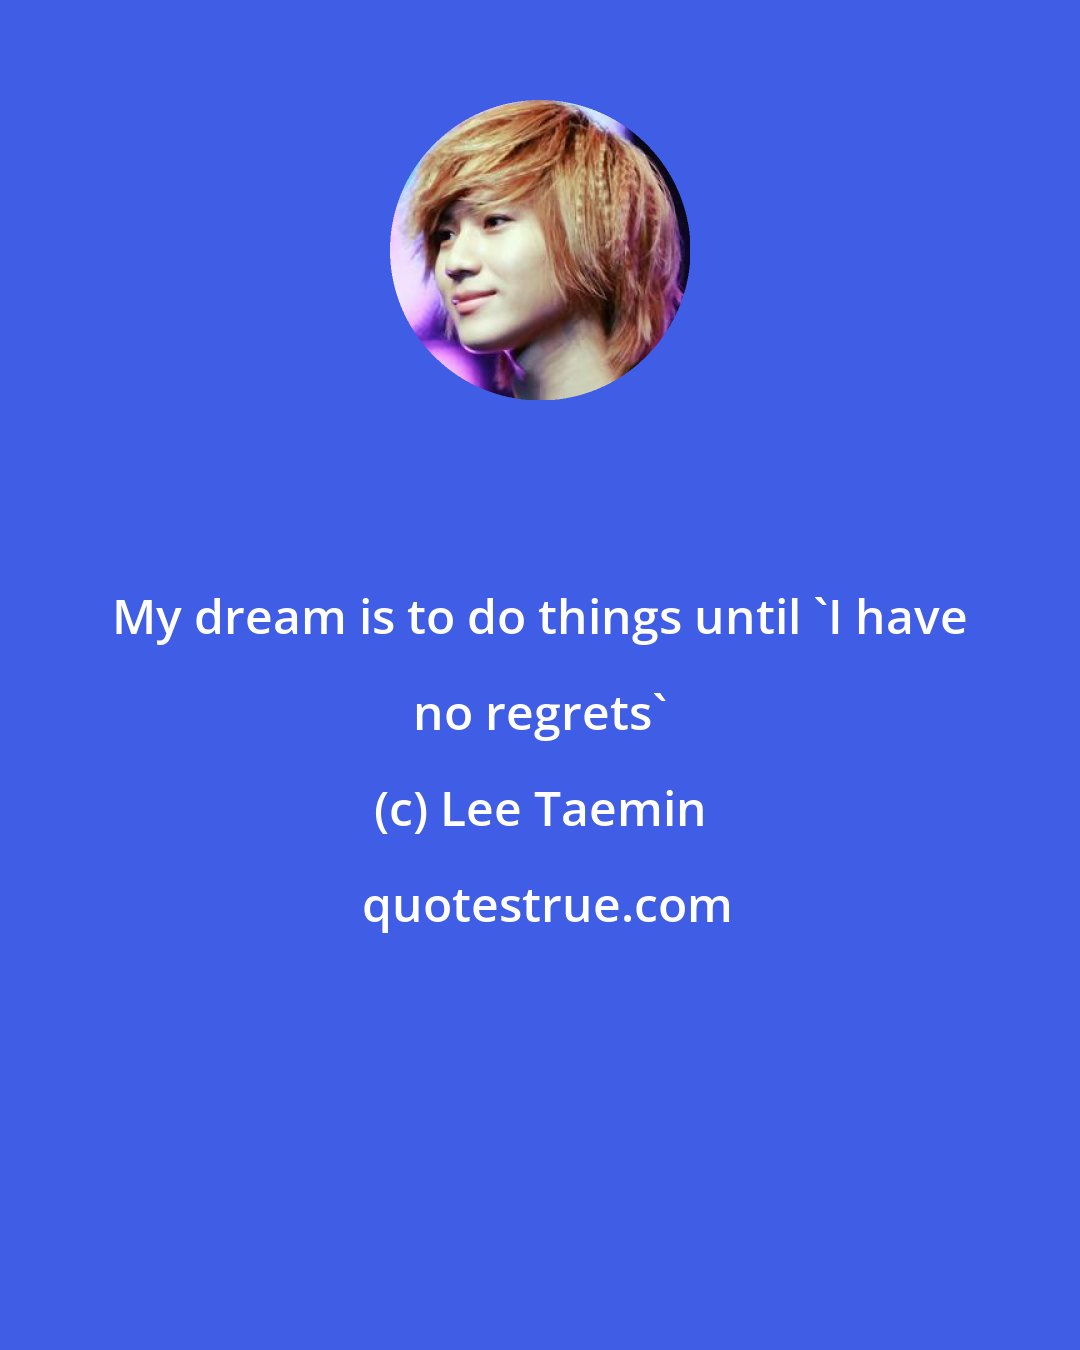 Lee Taemin: My dream is to do things until 'I have no regrets'